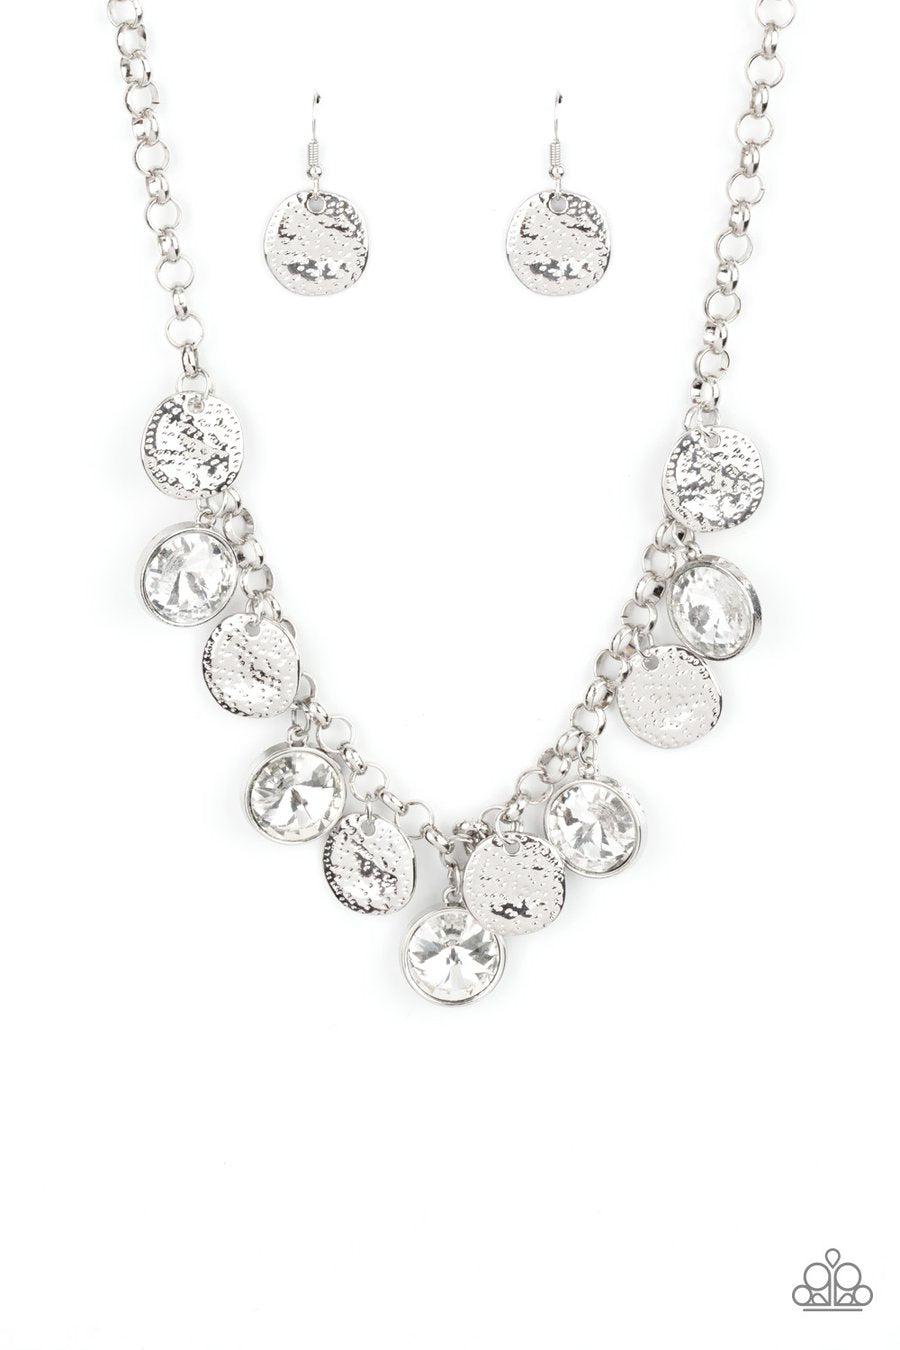 Spot On Sparkle White
Necklace - Daria's Blings N Things